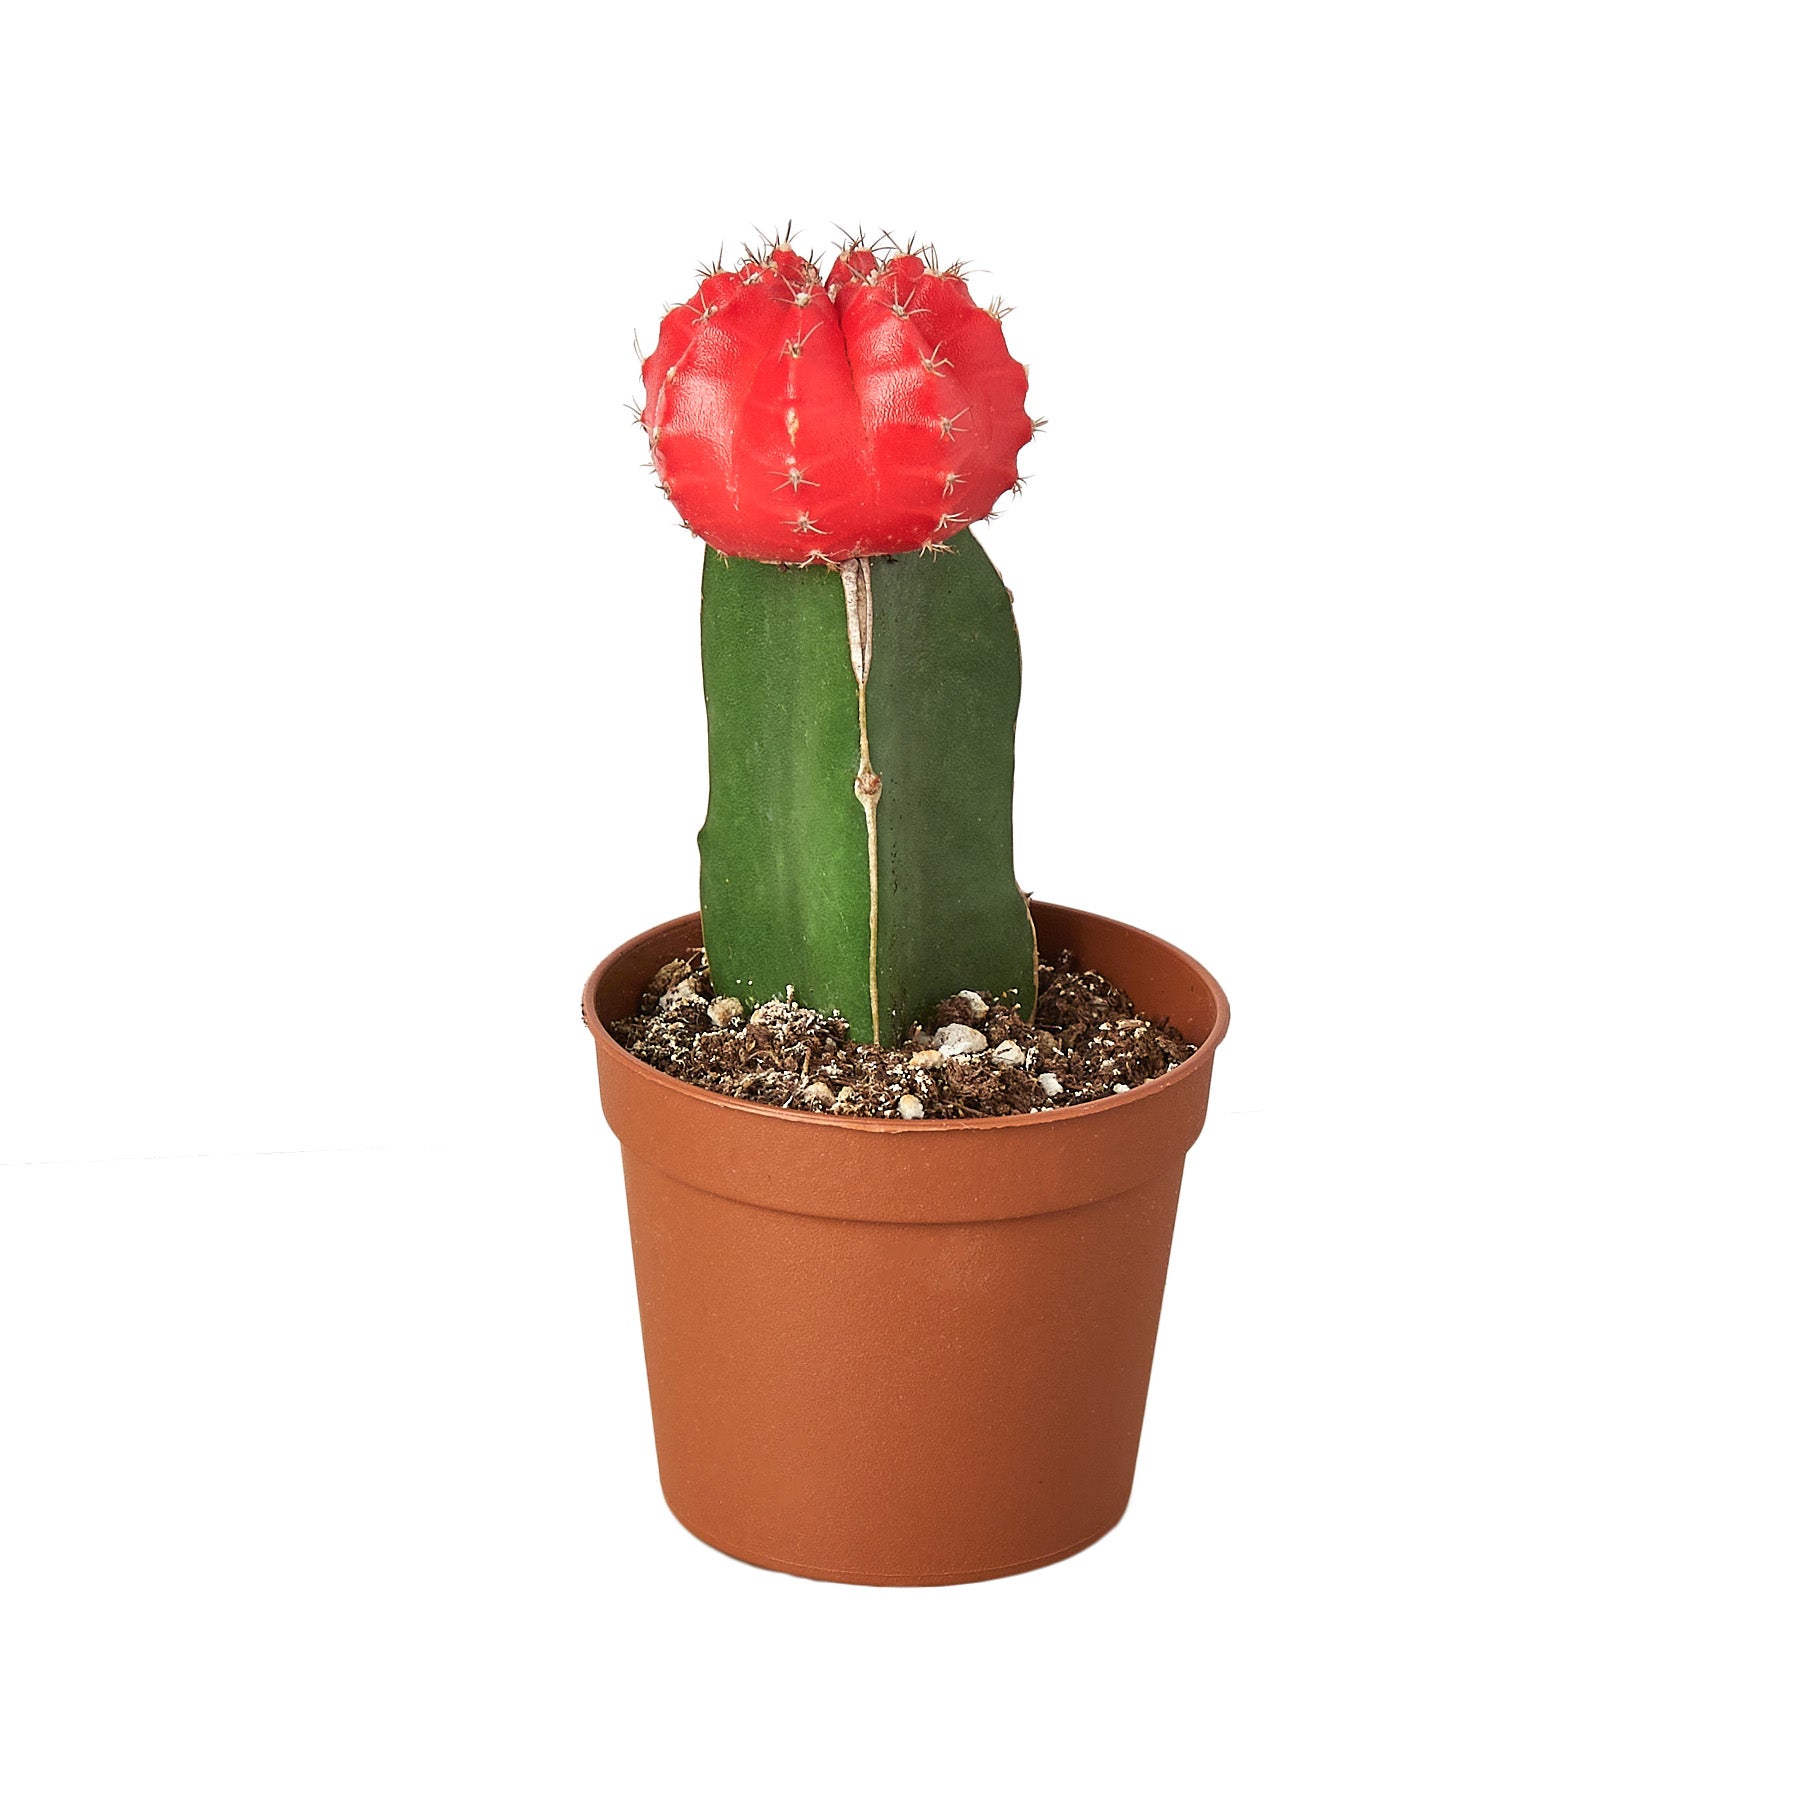 A red cactus potted on a white background at a plant nursery near me.